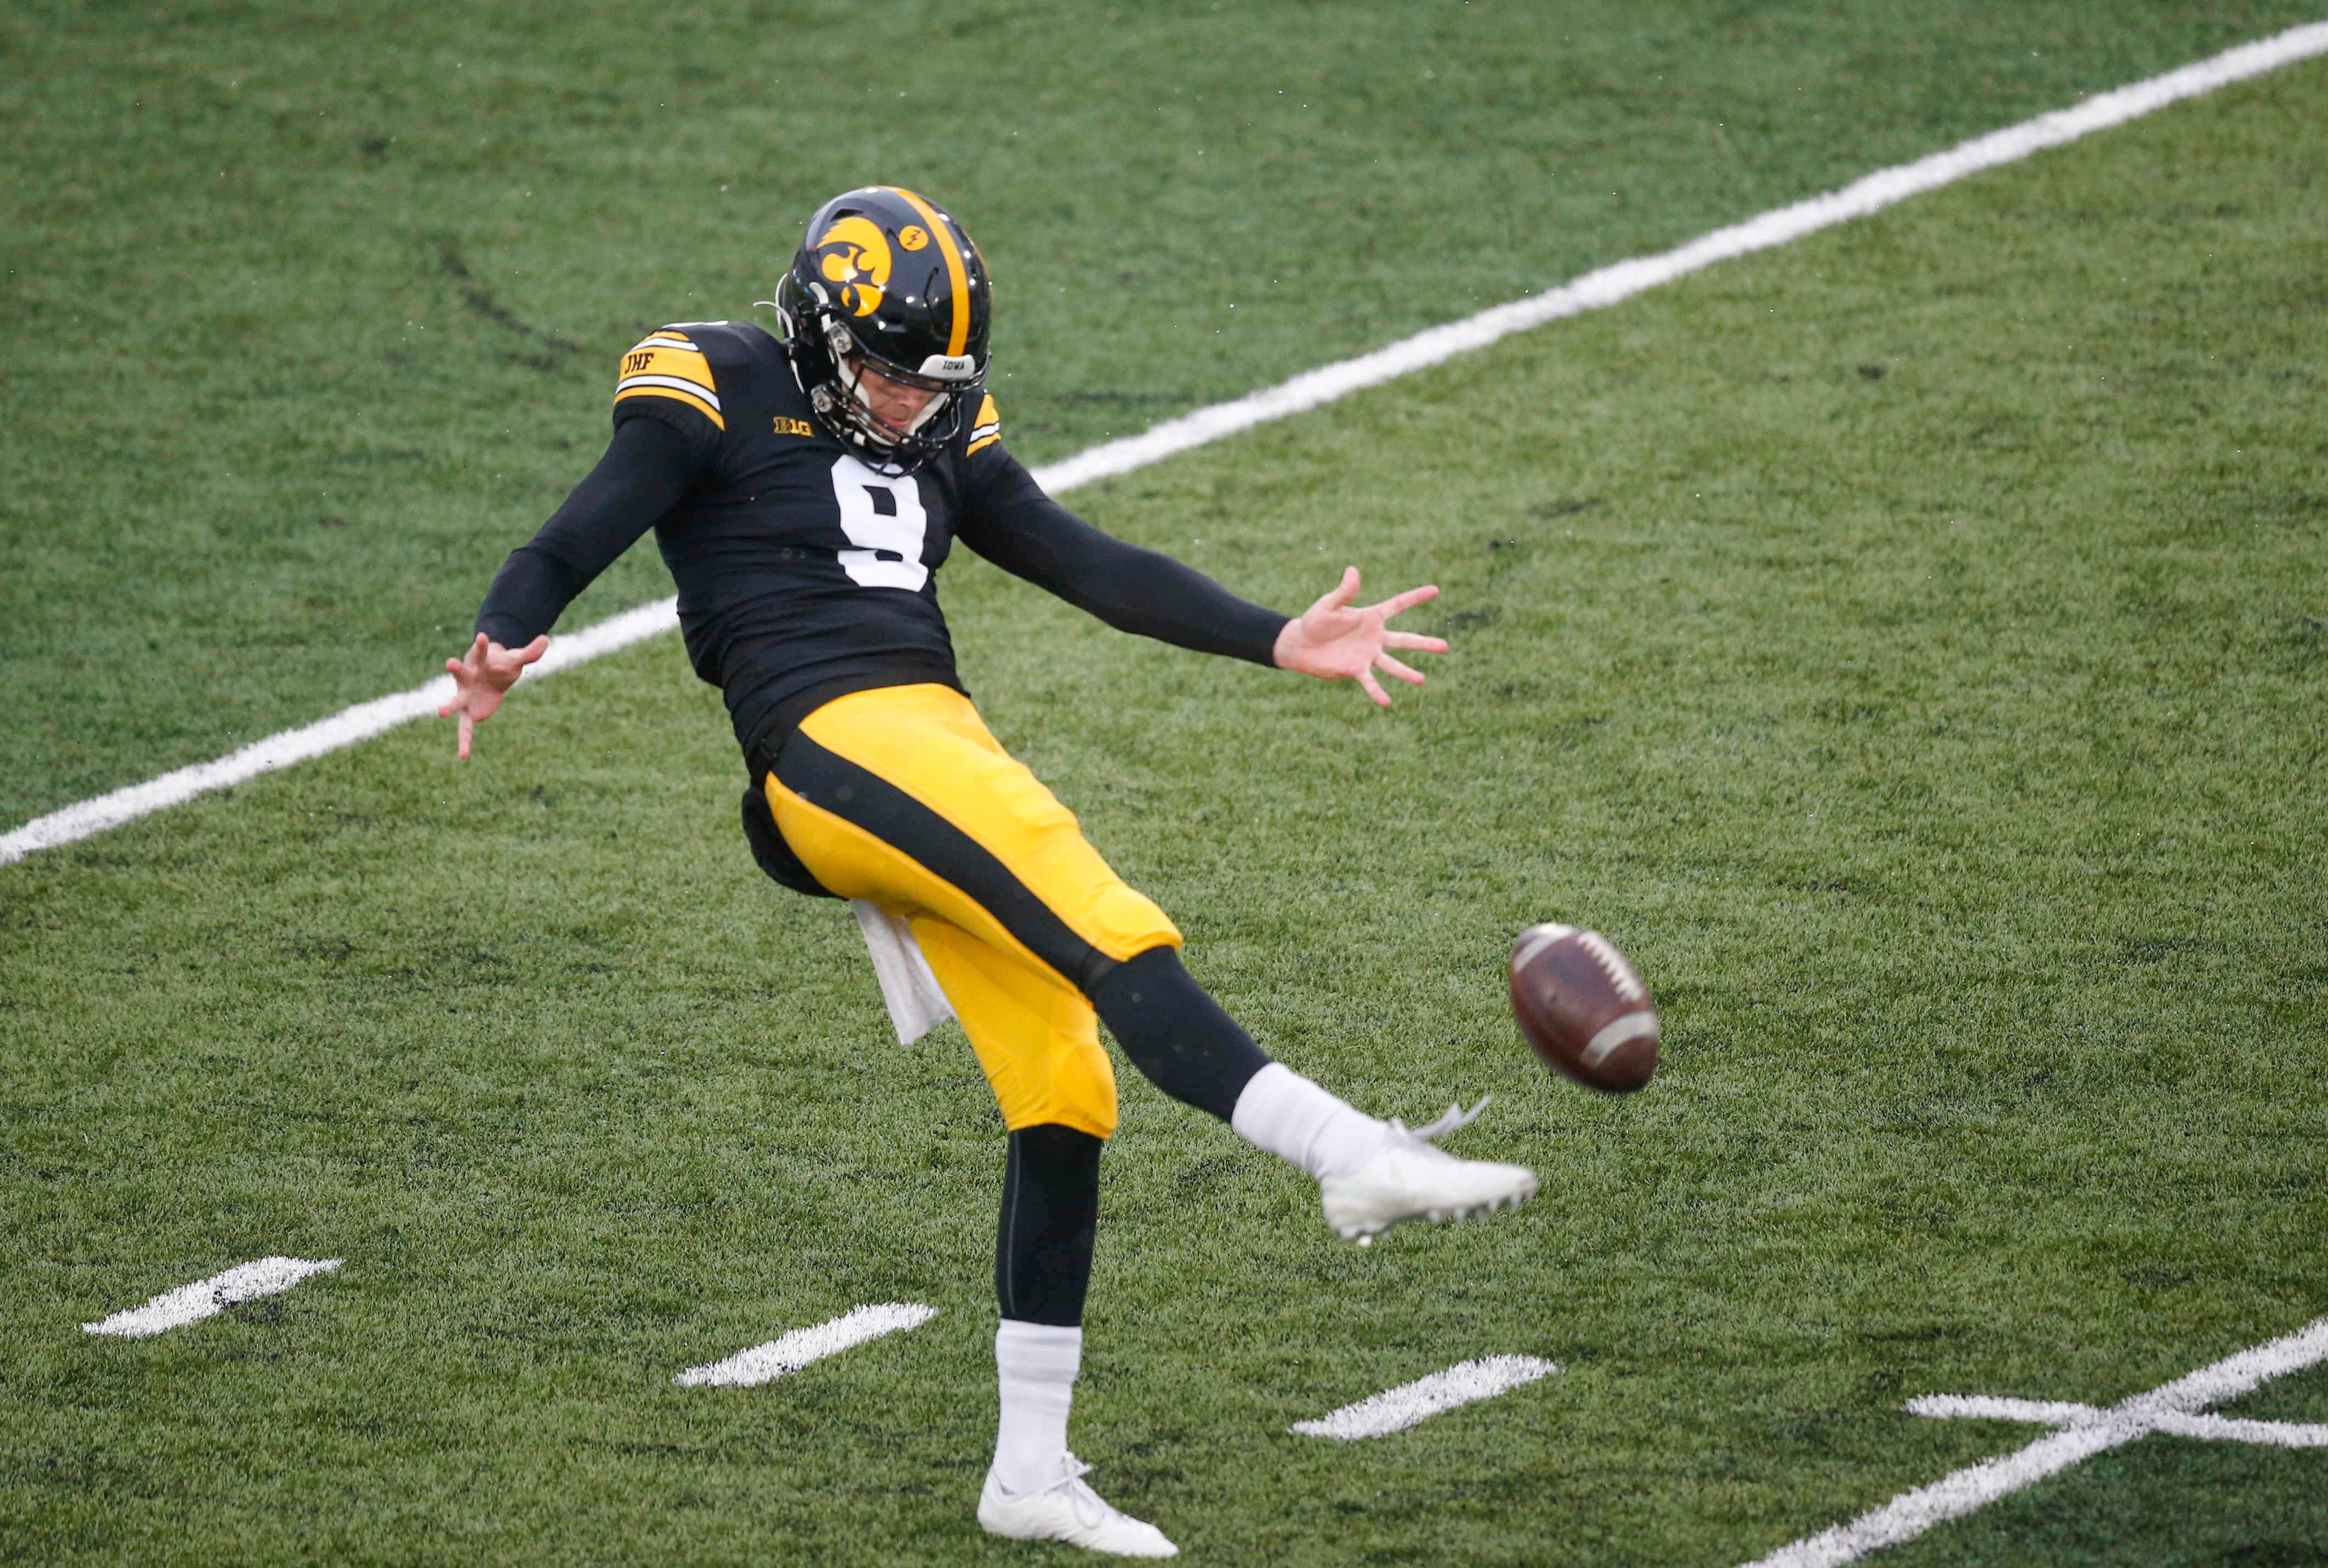 Iowa punter Tory Taylor punts the ball in the second quarter against Wisconsin on Saturday, Dec. 12, 2020, at Kinnick Stadium in Iowa City, Iowa.